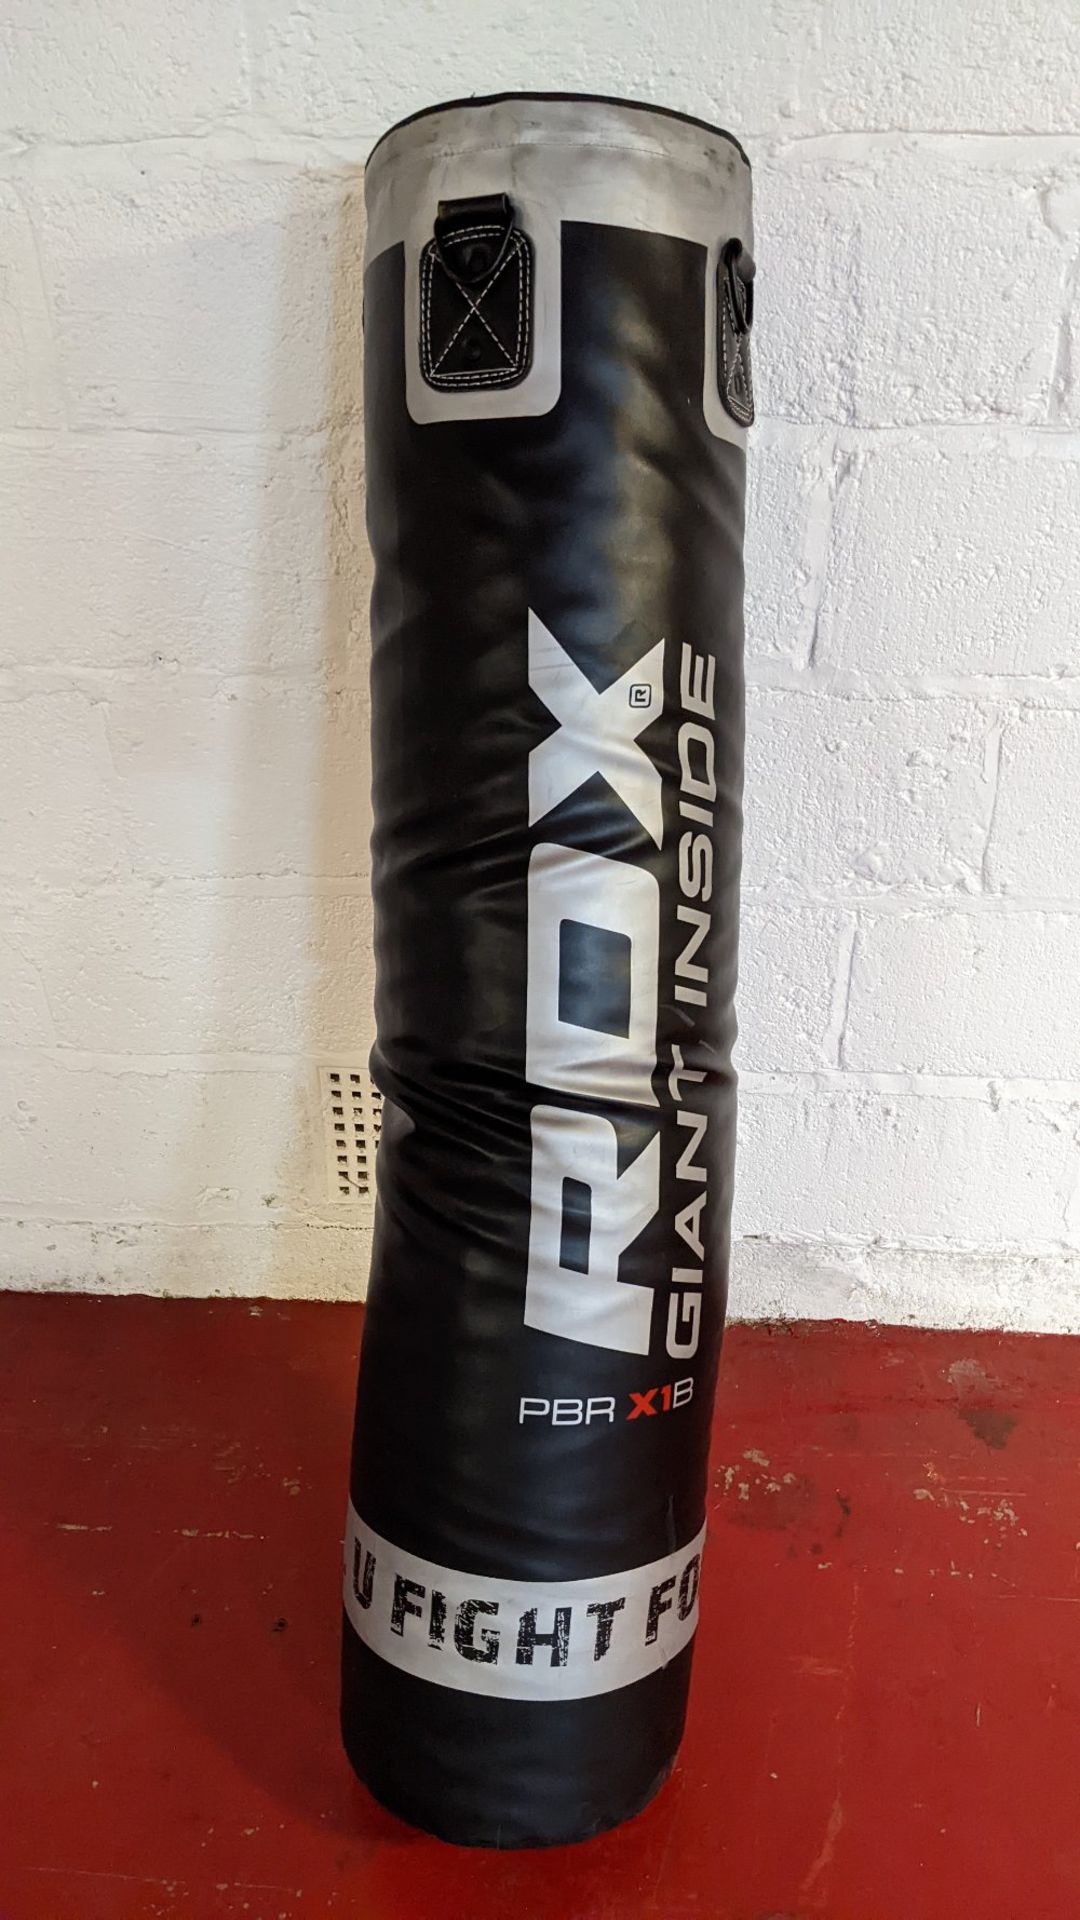 Rox PBR X1B Boxing Punch Bag with gloves - Image 2 of 3